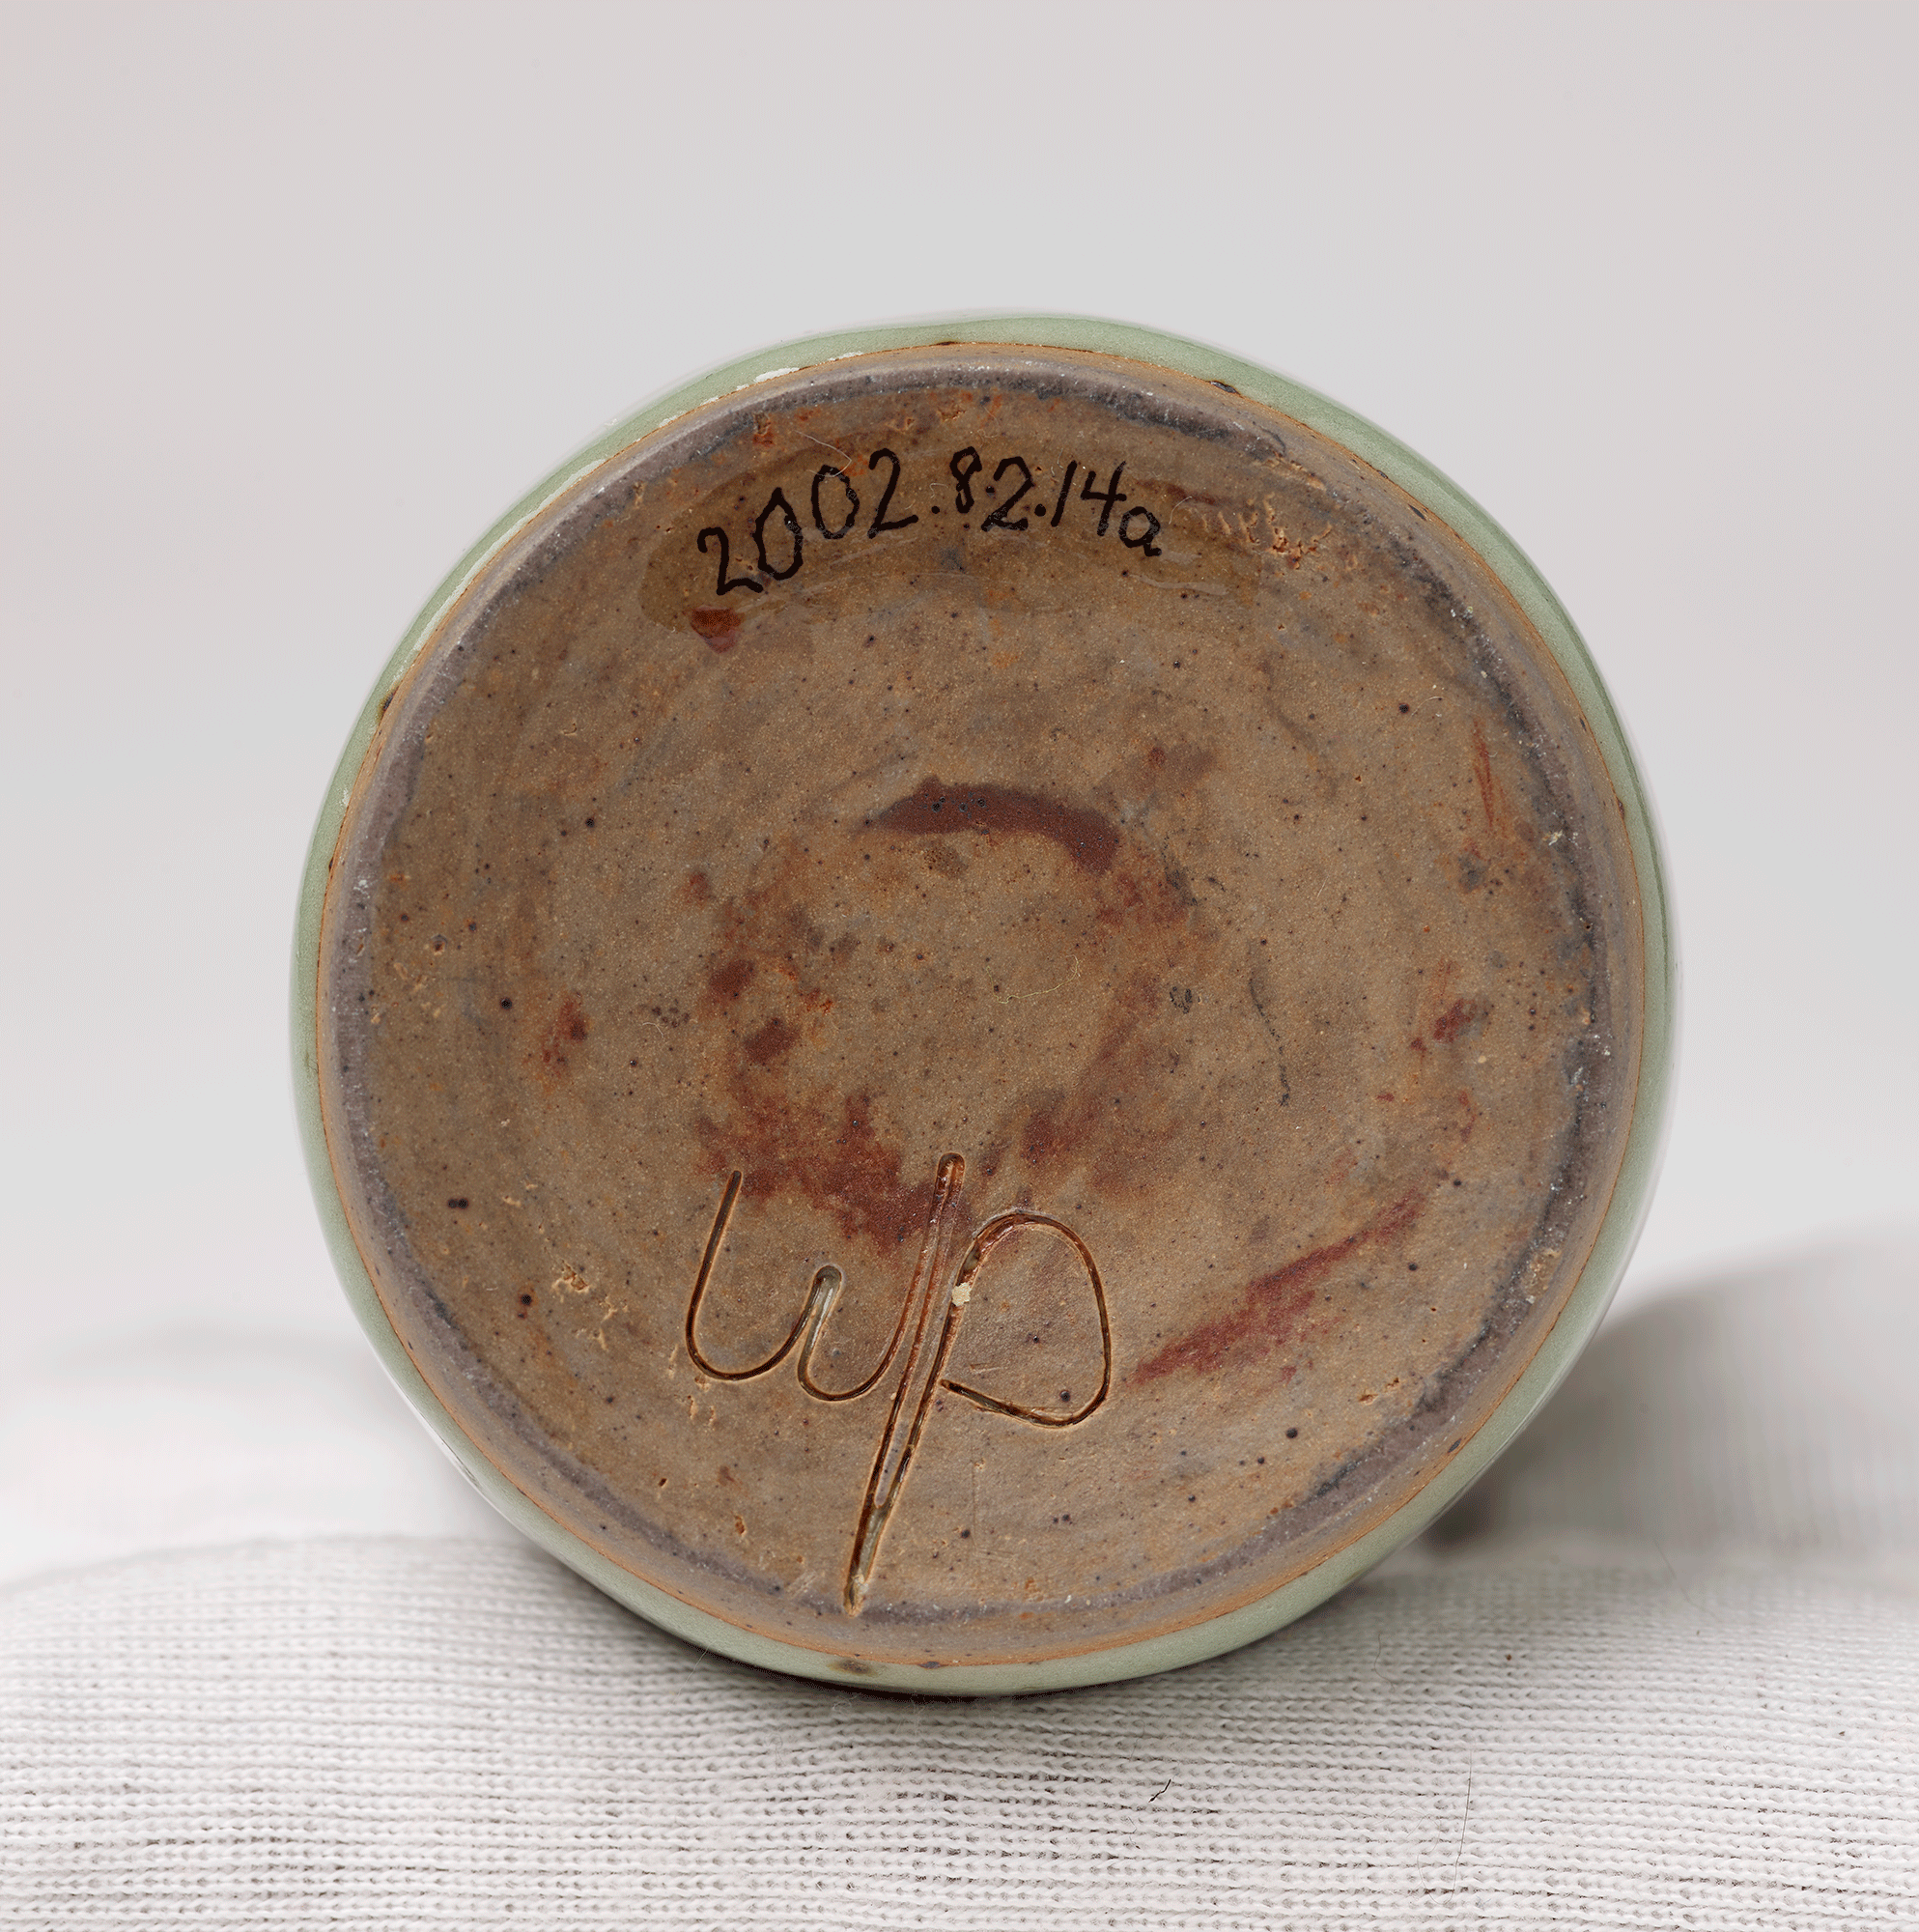 Underside of decanter. Letters “wp” are carved into the clay. Accession number is visible.